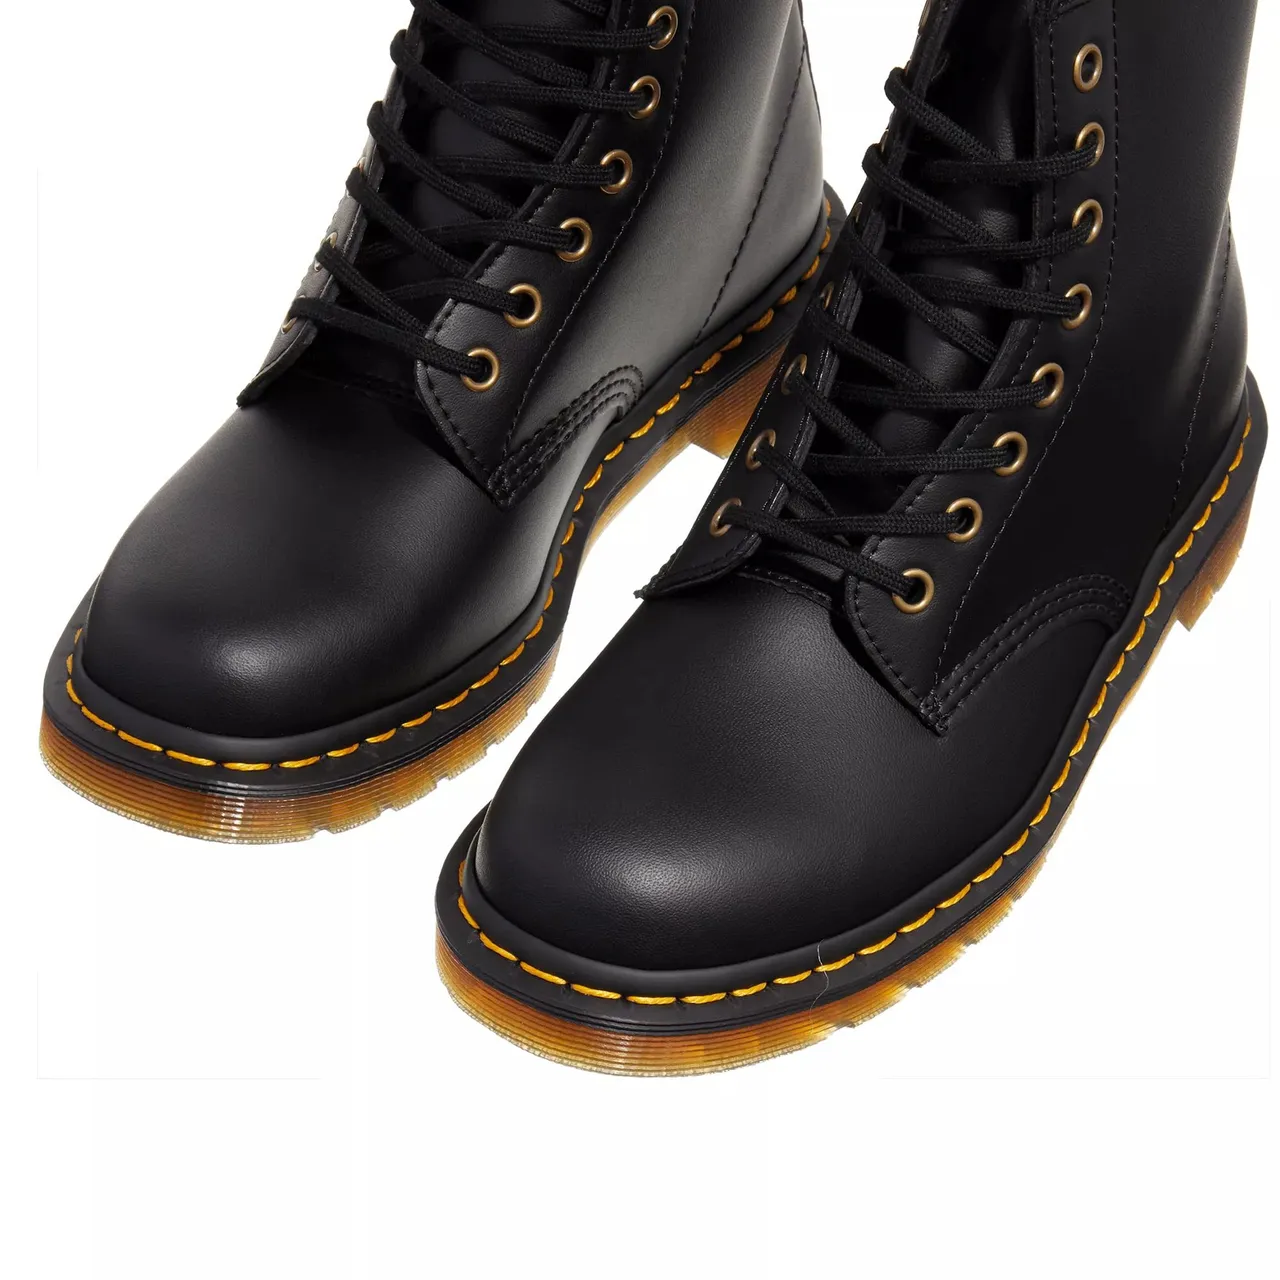 Dr. Martens Boots & Ankle Boots - Vegan 1460 - black - Boots & Ankle Boots for ladies